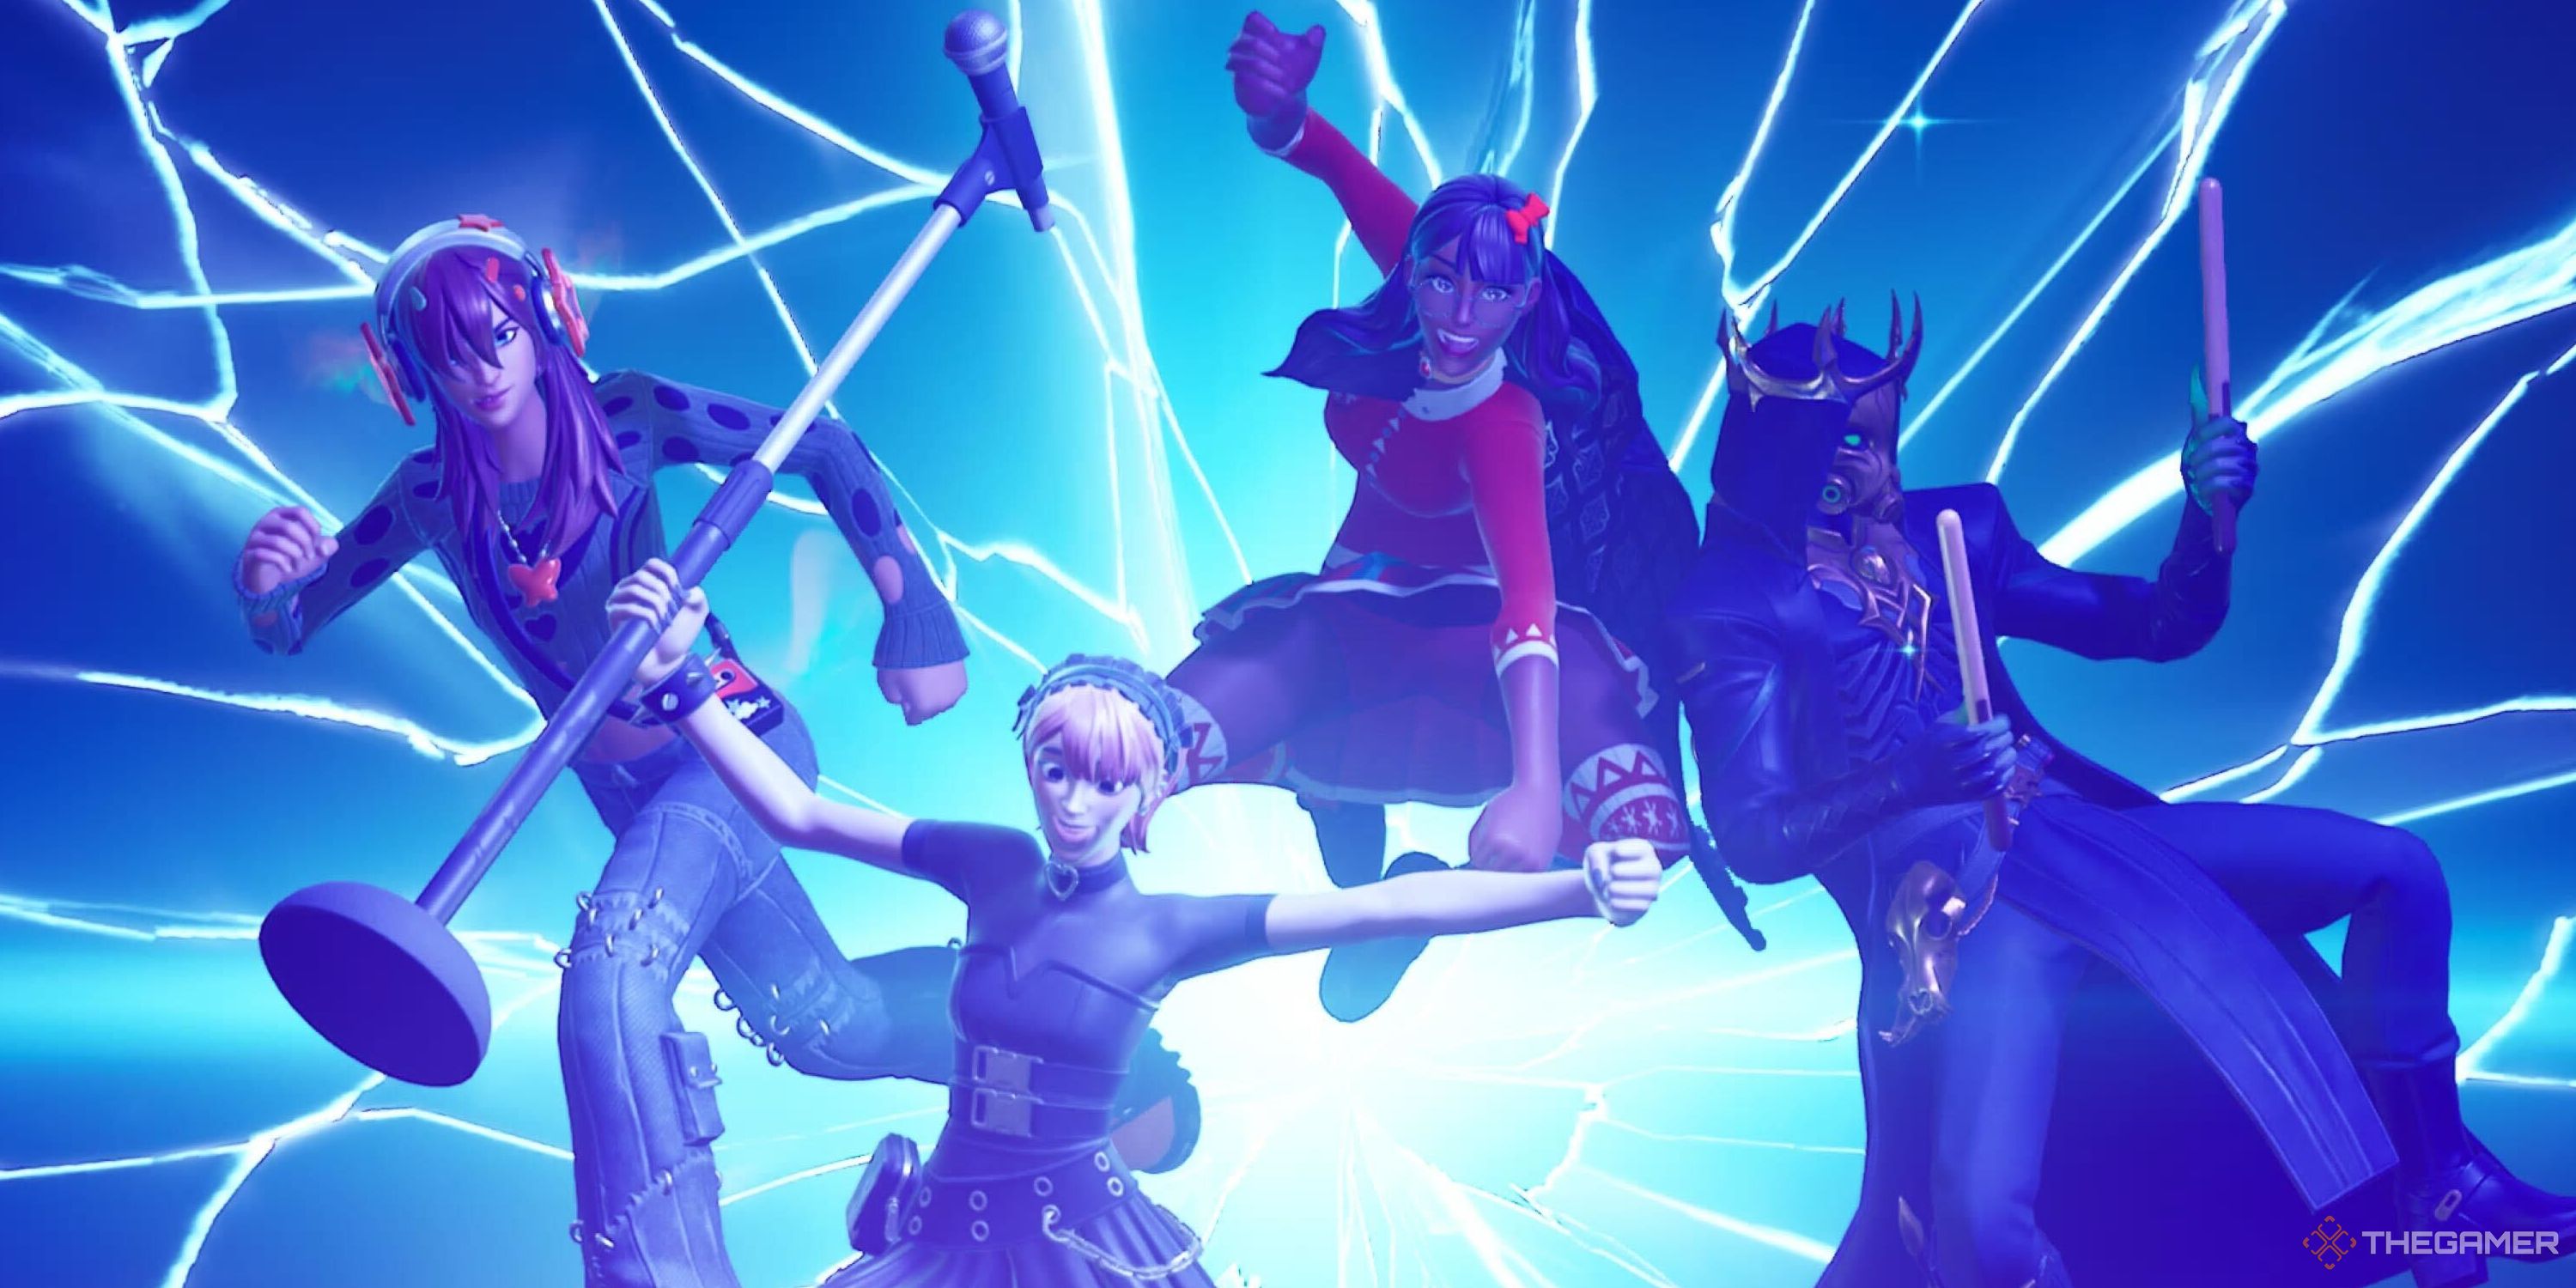 A screenshot from Fortnite Festival showing three players as band members warping into the stage from a rift behind them, while holding their instruments.